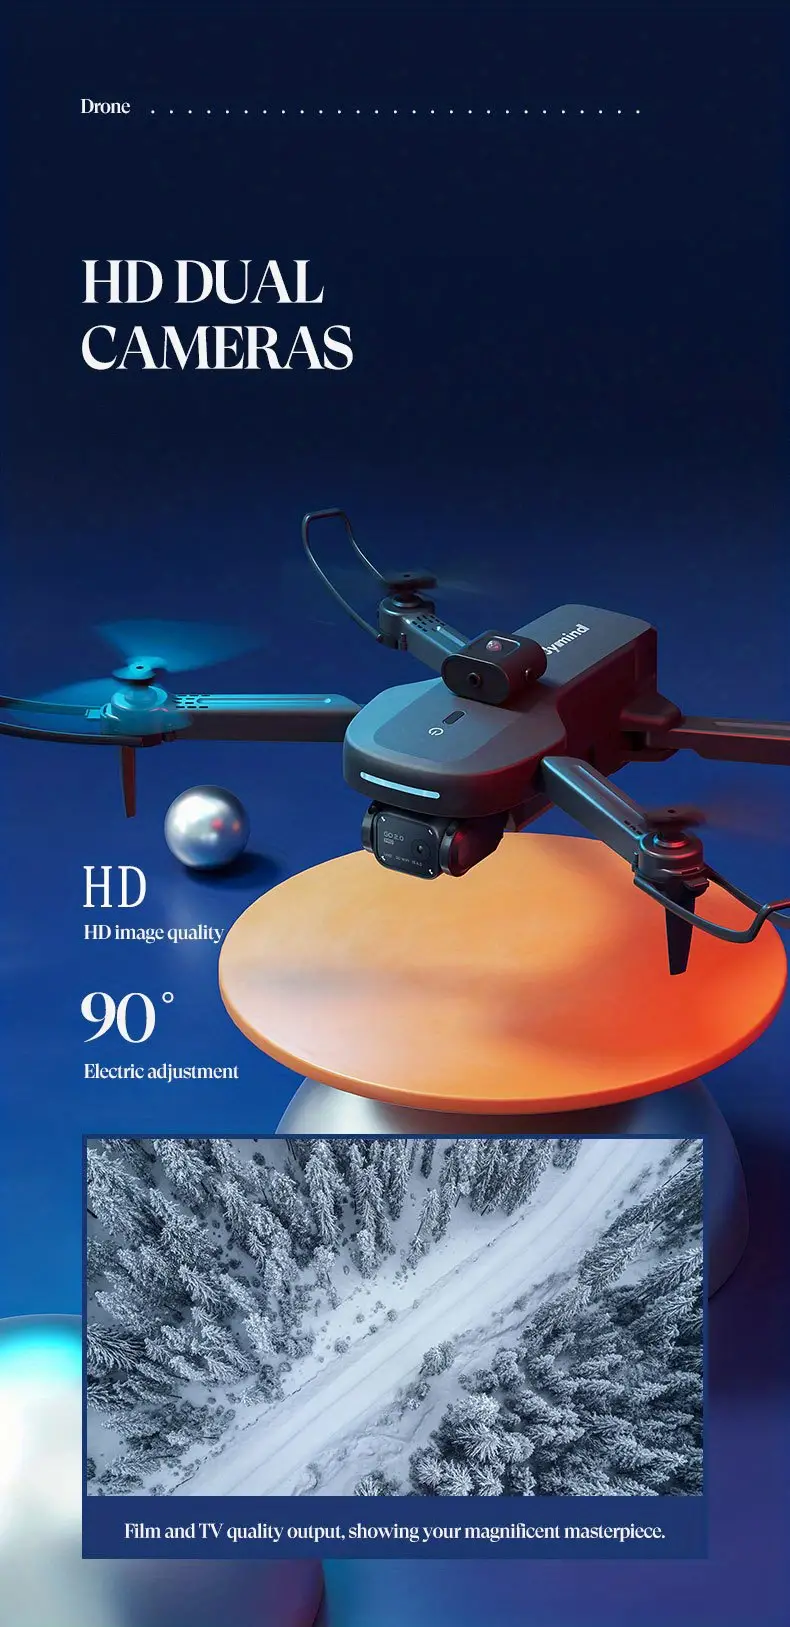 dual esc camera drone with 5g image transmission one key return stable electronic stabilized gimbal obstacle avoidance 1 2 batteries smart follow low power return good for beginners details 2